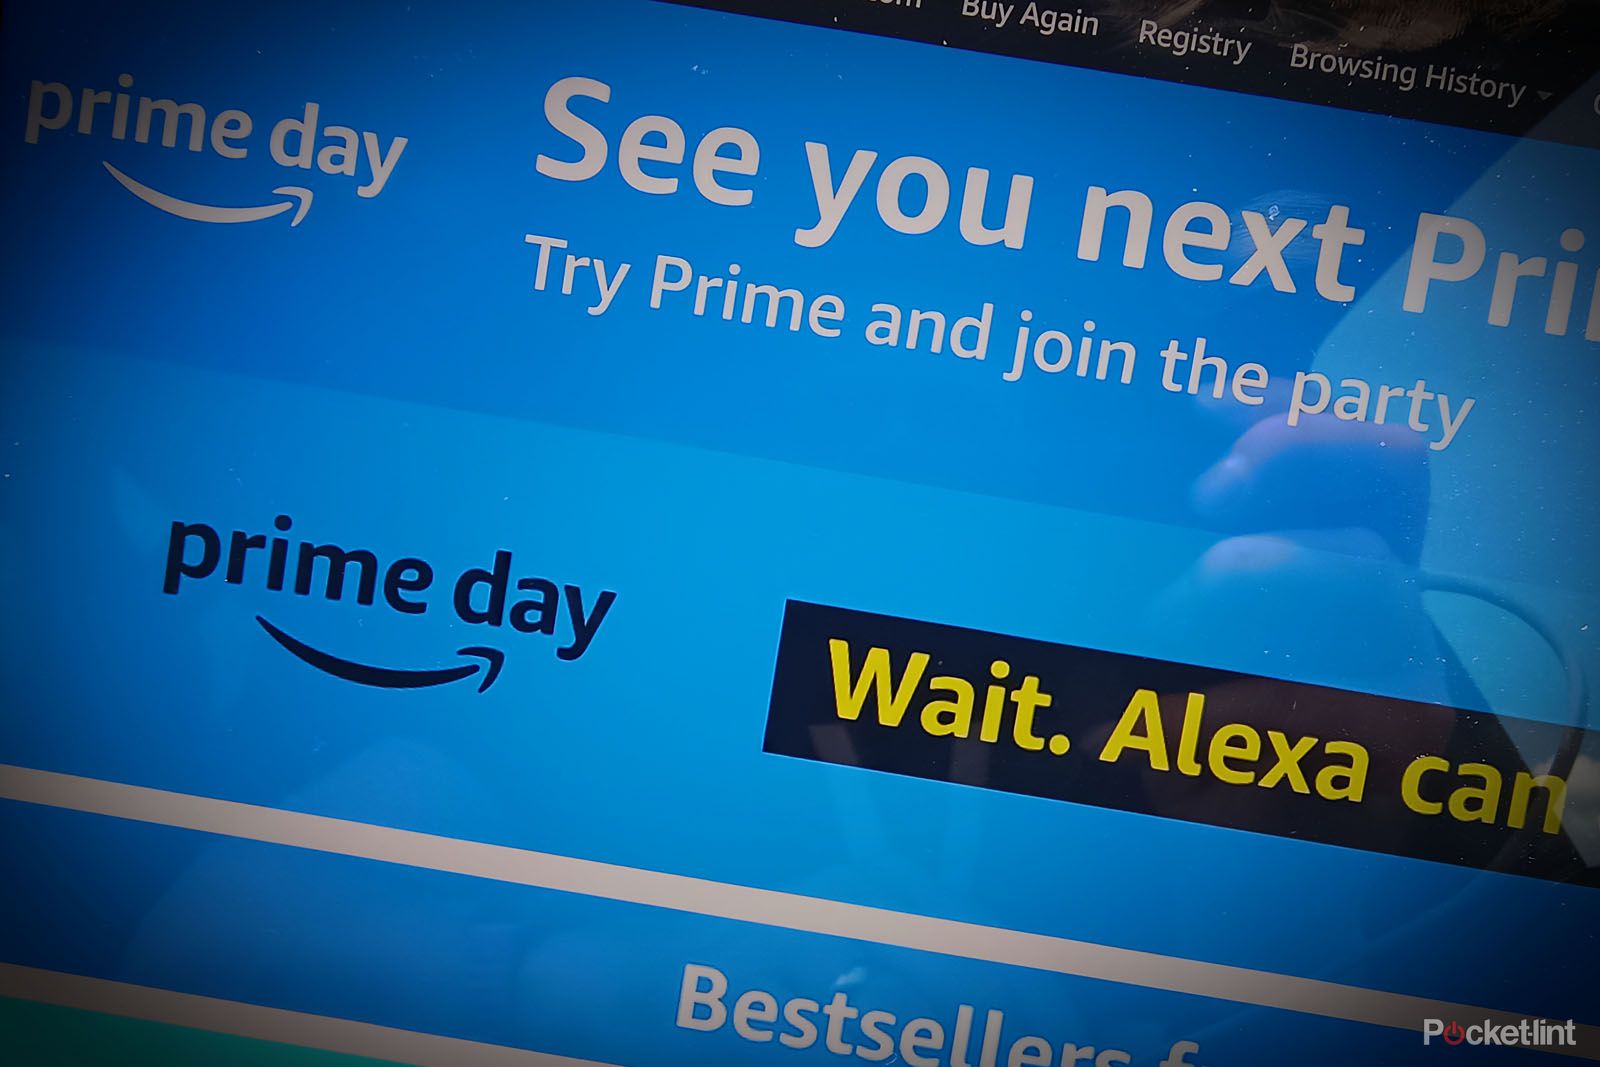 The dates and details for Amazon Prime Day have been revealed All